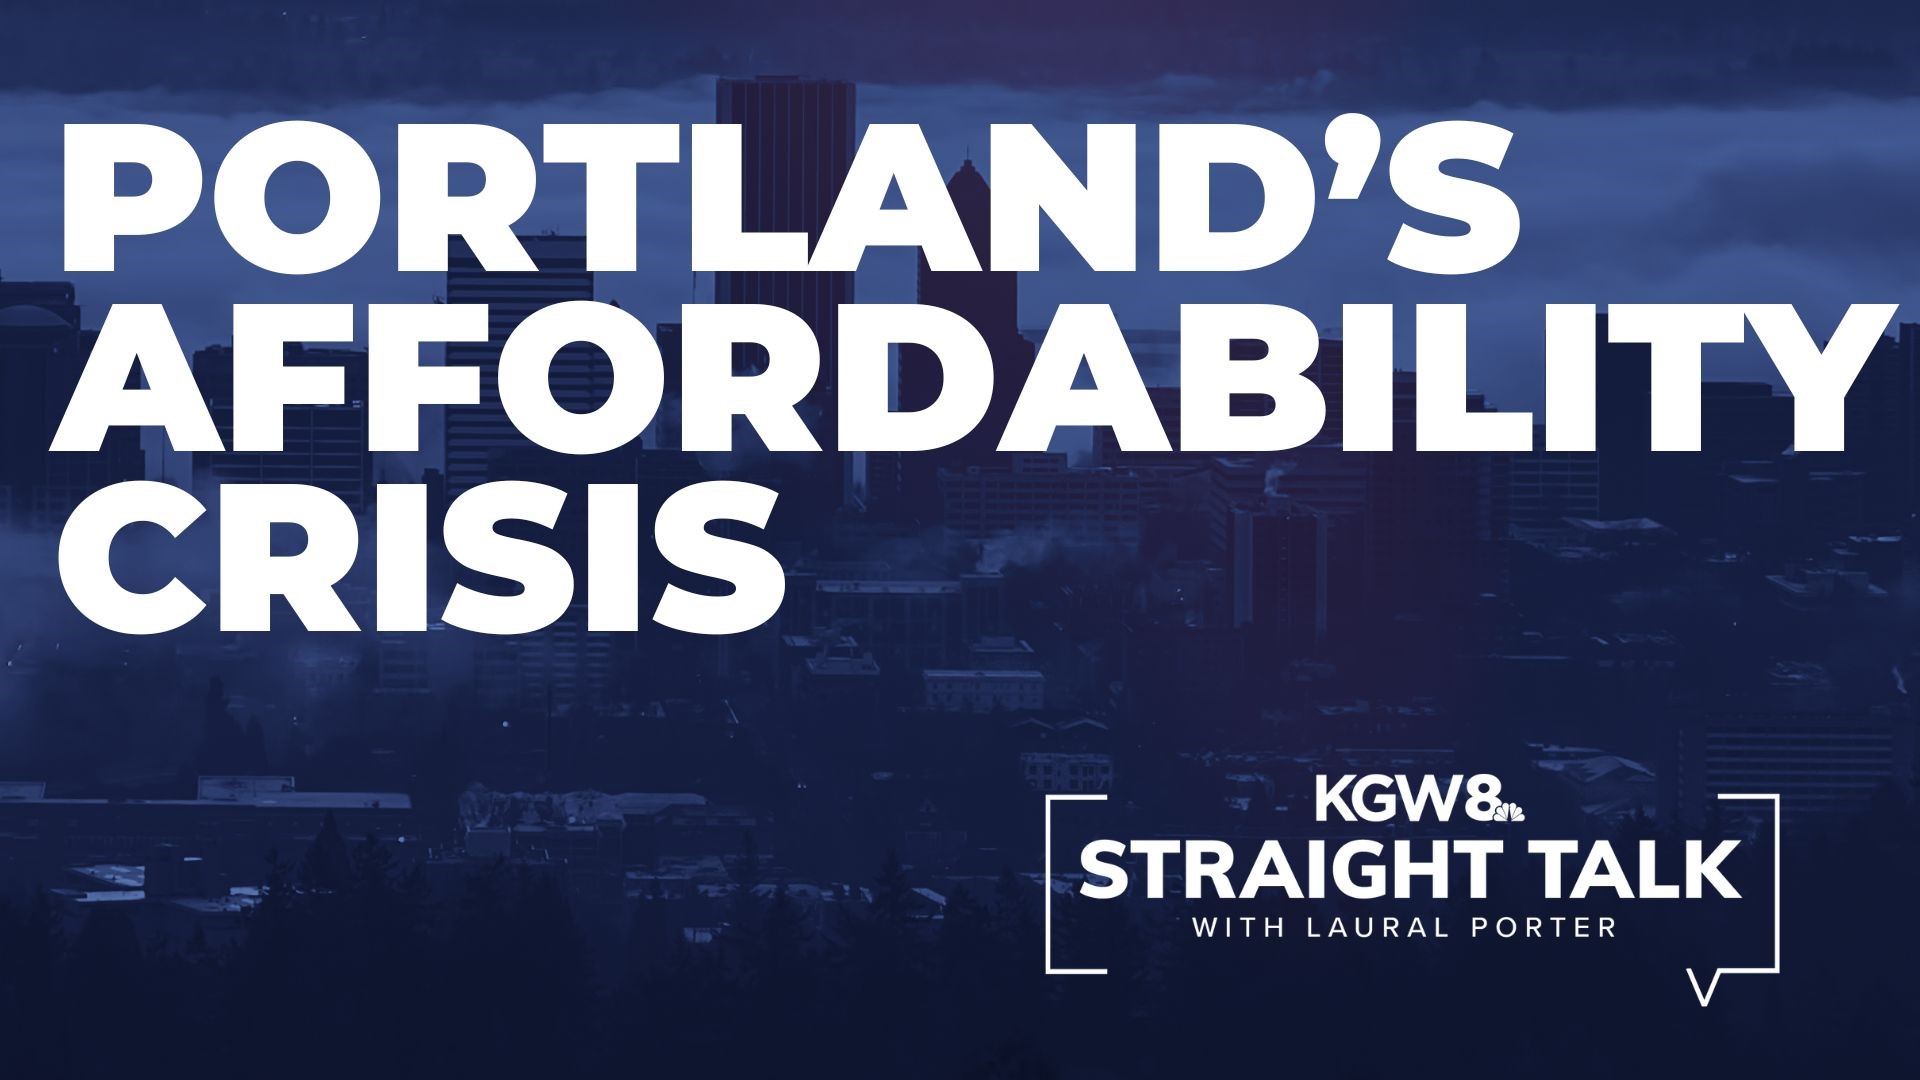 While some metrics improved in 2023, a recent poll commissioned by the Portland Metro Chamber showed that voters have deepening concerns about the future.